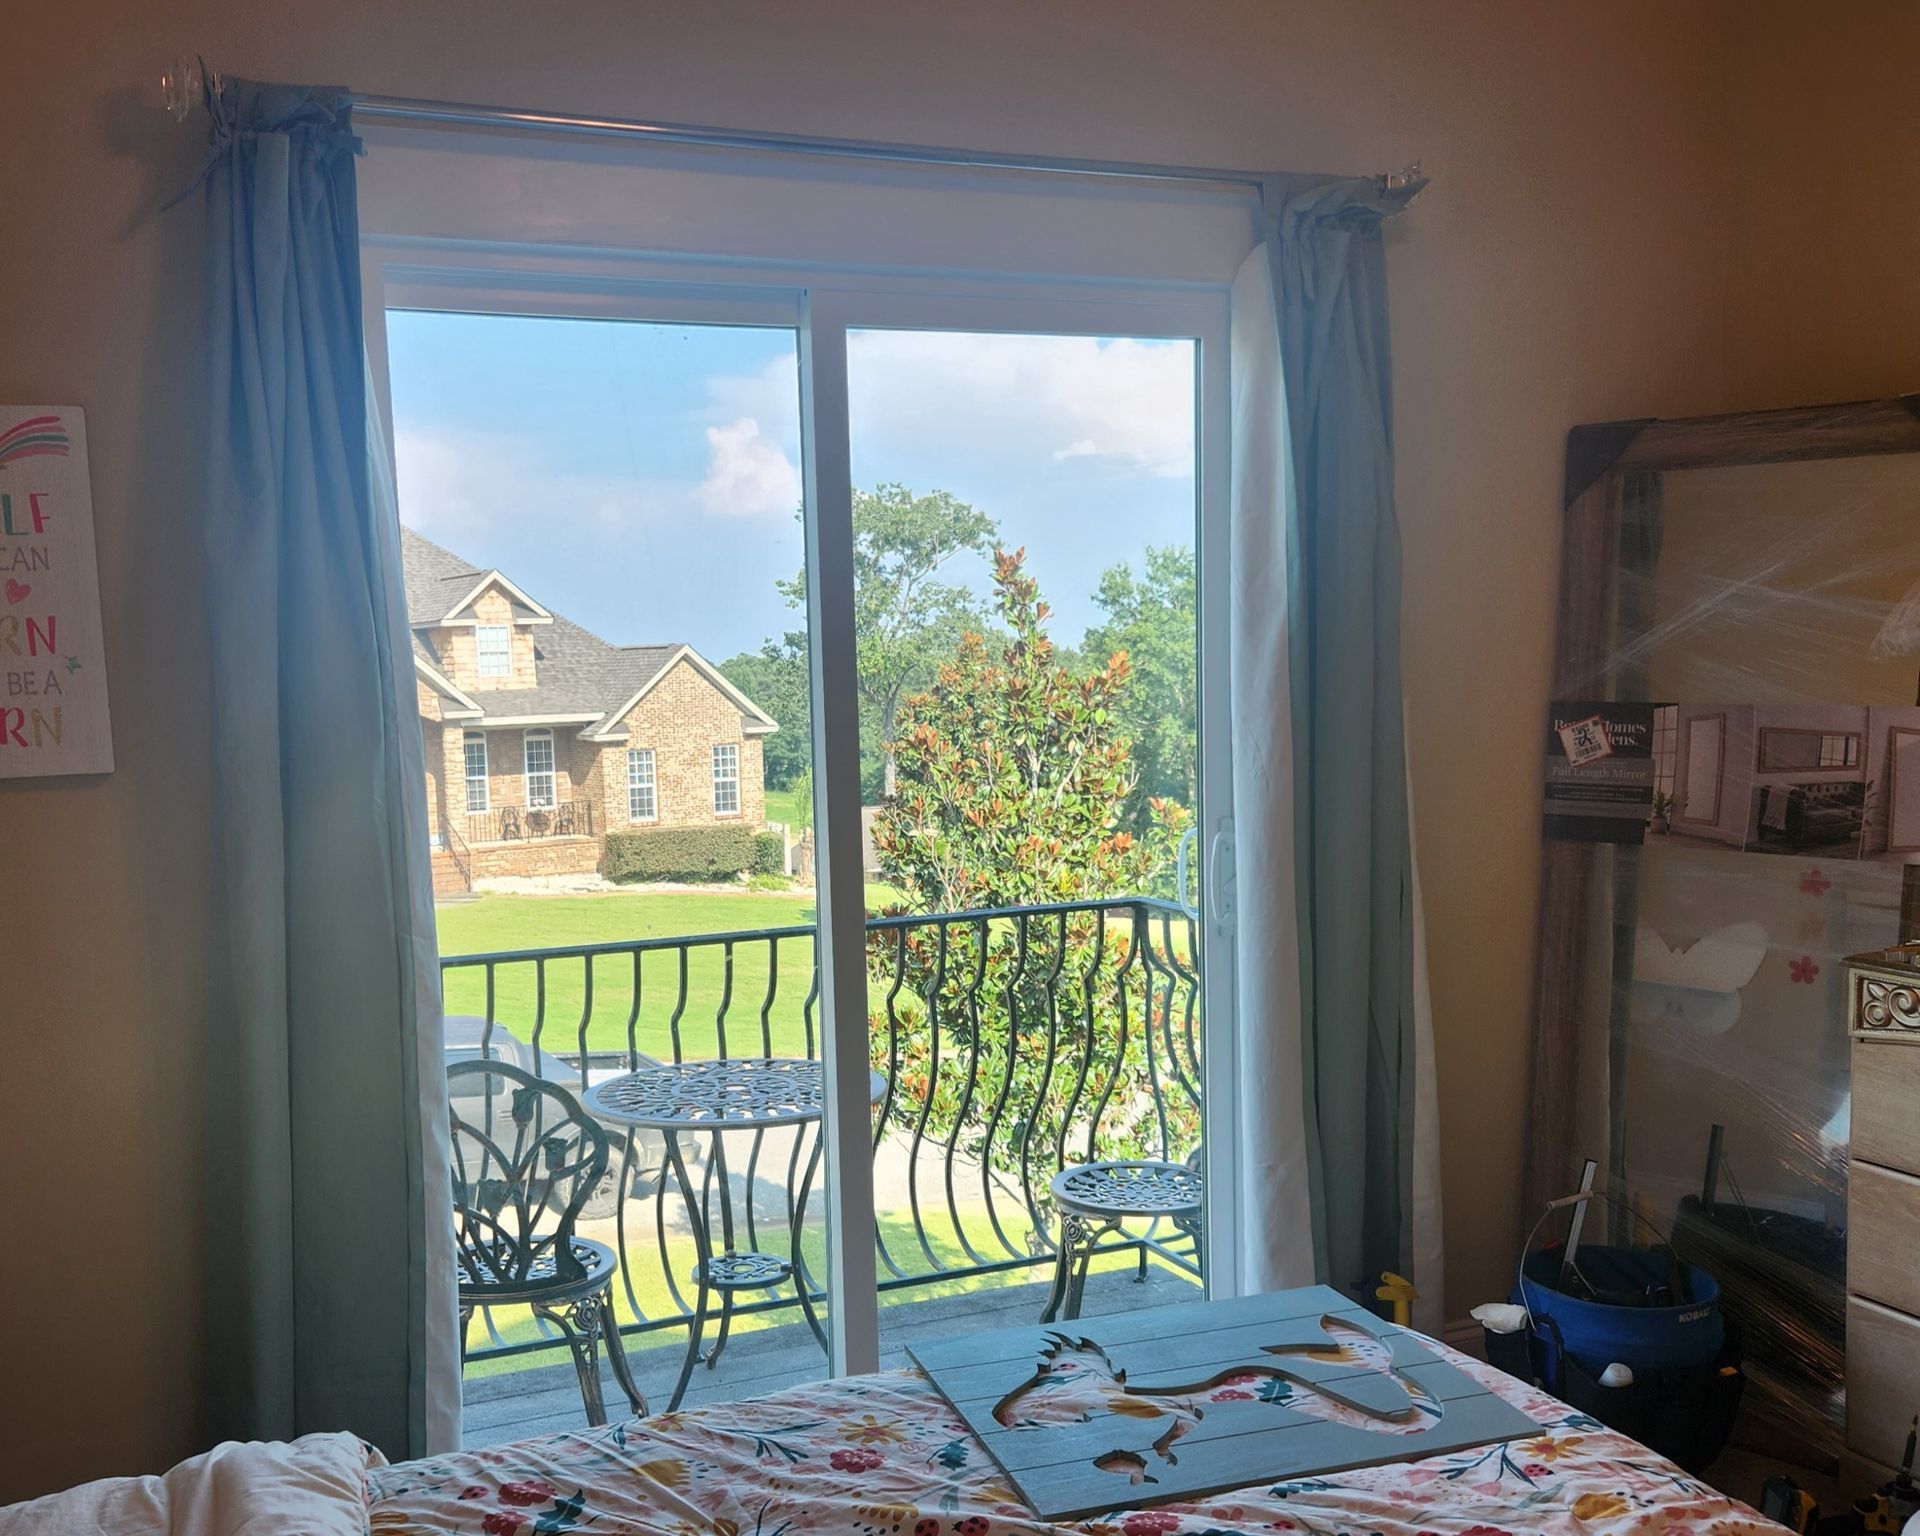 window privacy tint - bright Sun was reduced and temperature-transfer blocked by SPF Tint in Millbrook, AL